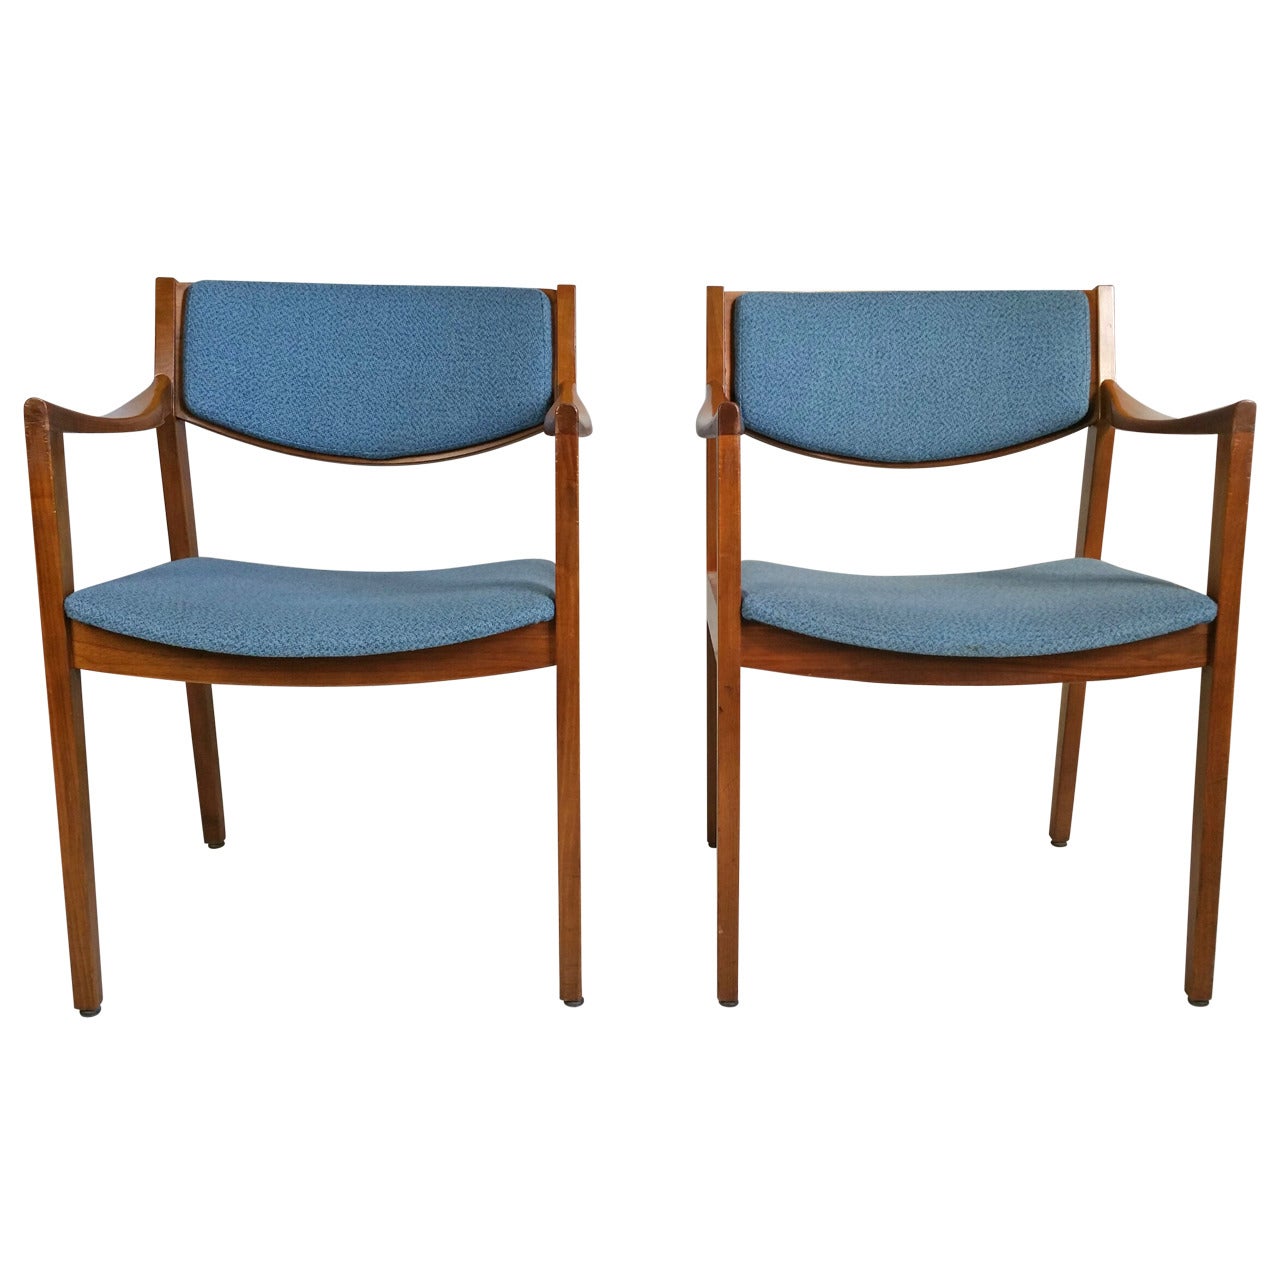 Pair of Mid-Century Modern Gunlock Arm Chairs in the Jens Risom Style